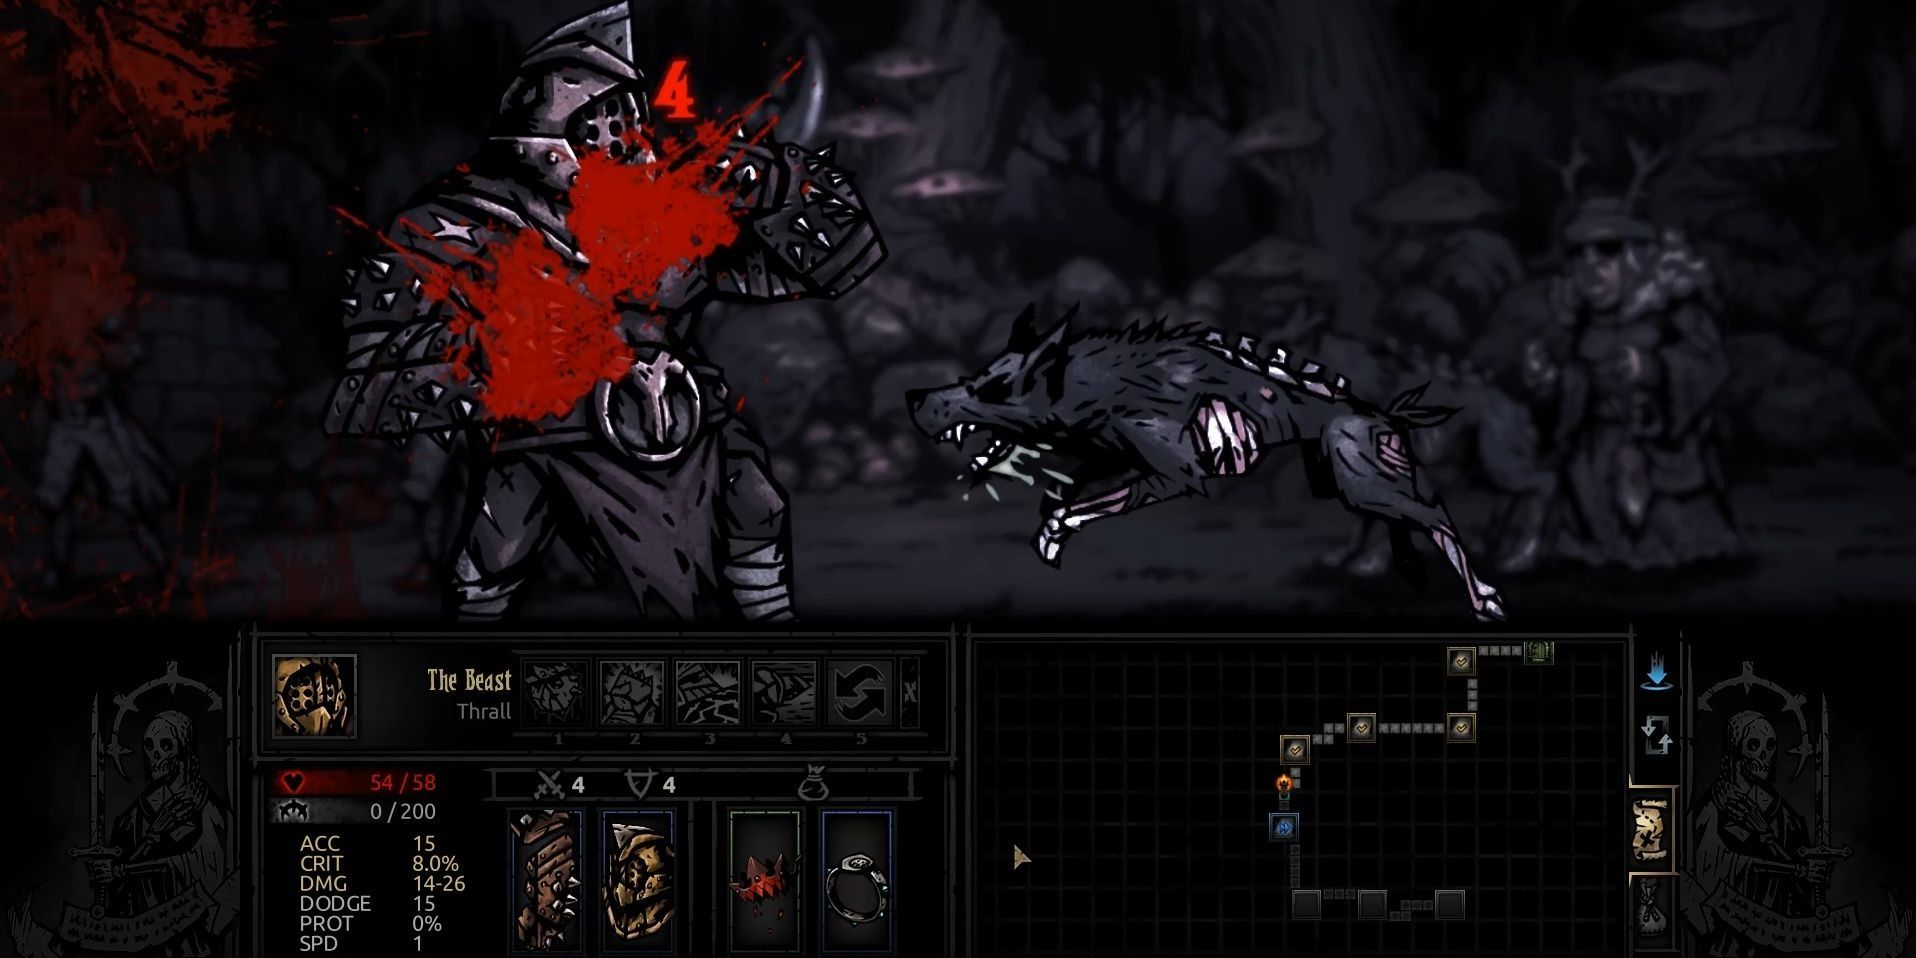 Marvin Seo's Thrall Class mod for Darkest Dungeon